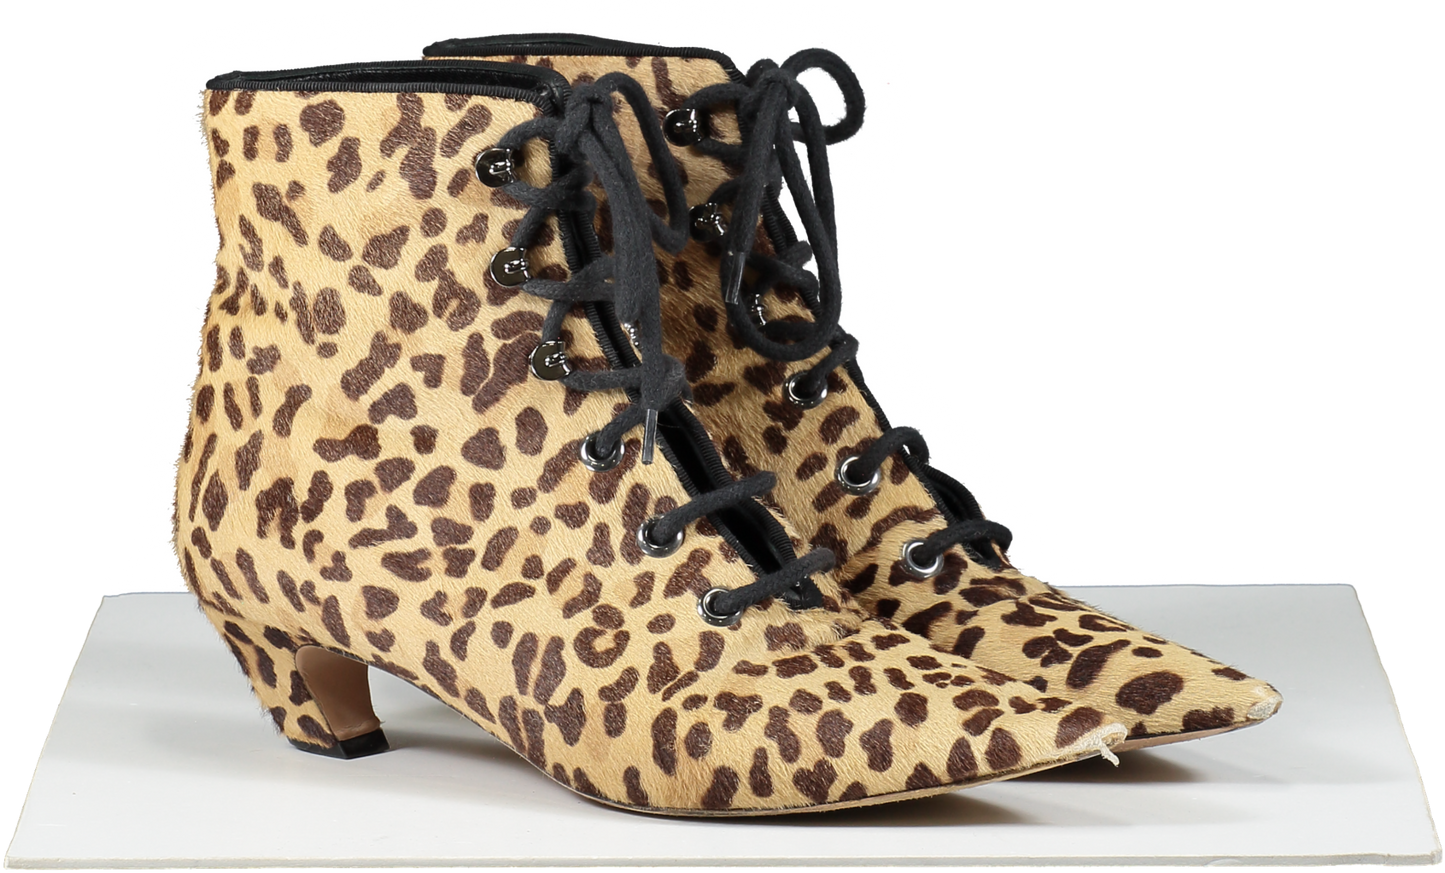 Dior Brown Lace Up Kitten Heel Ankle Boots- Leopard Print UK 5.5 EU 38.5 👠